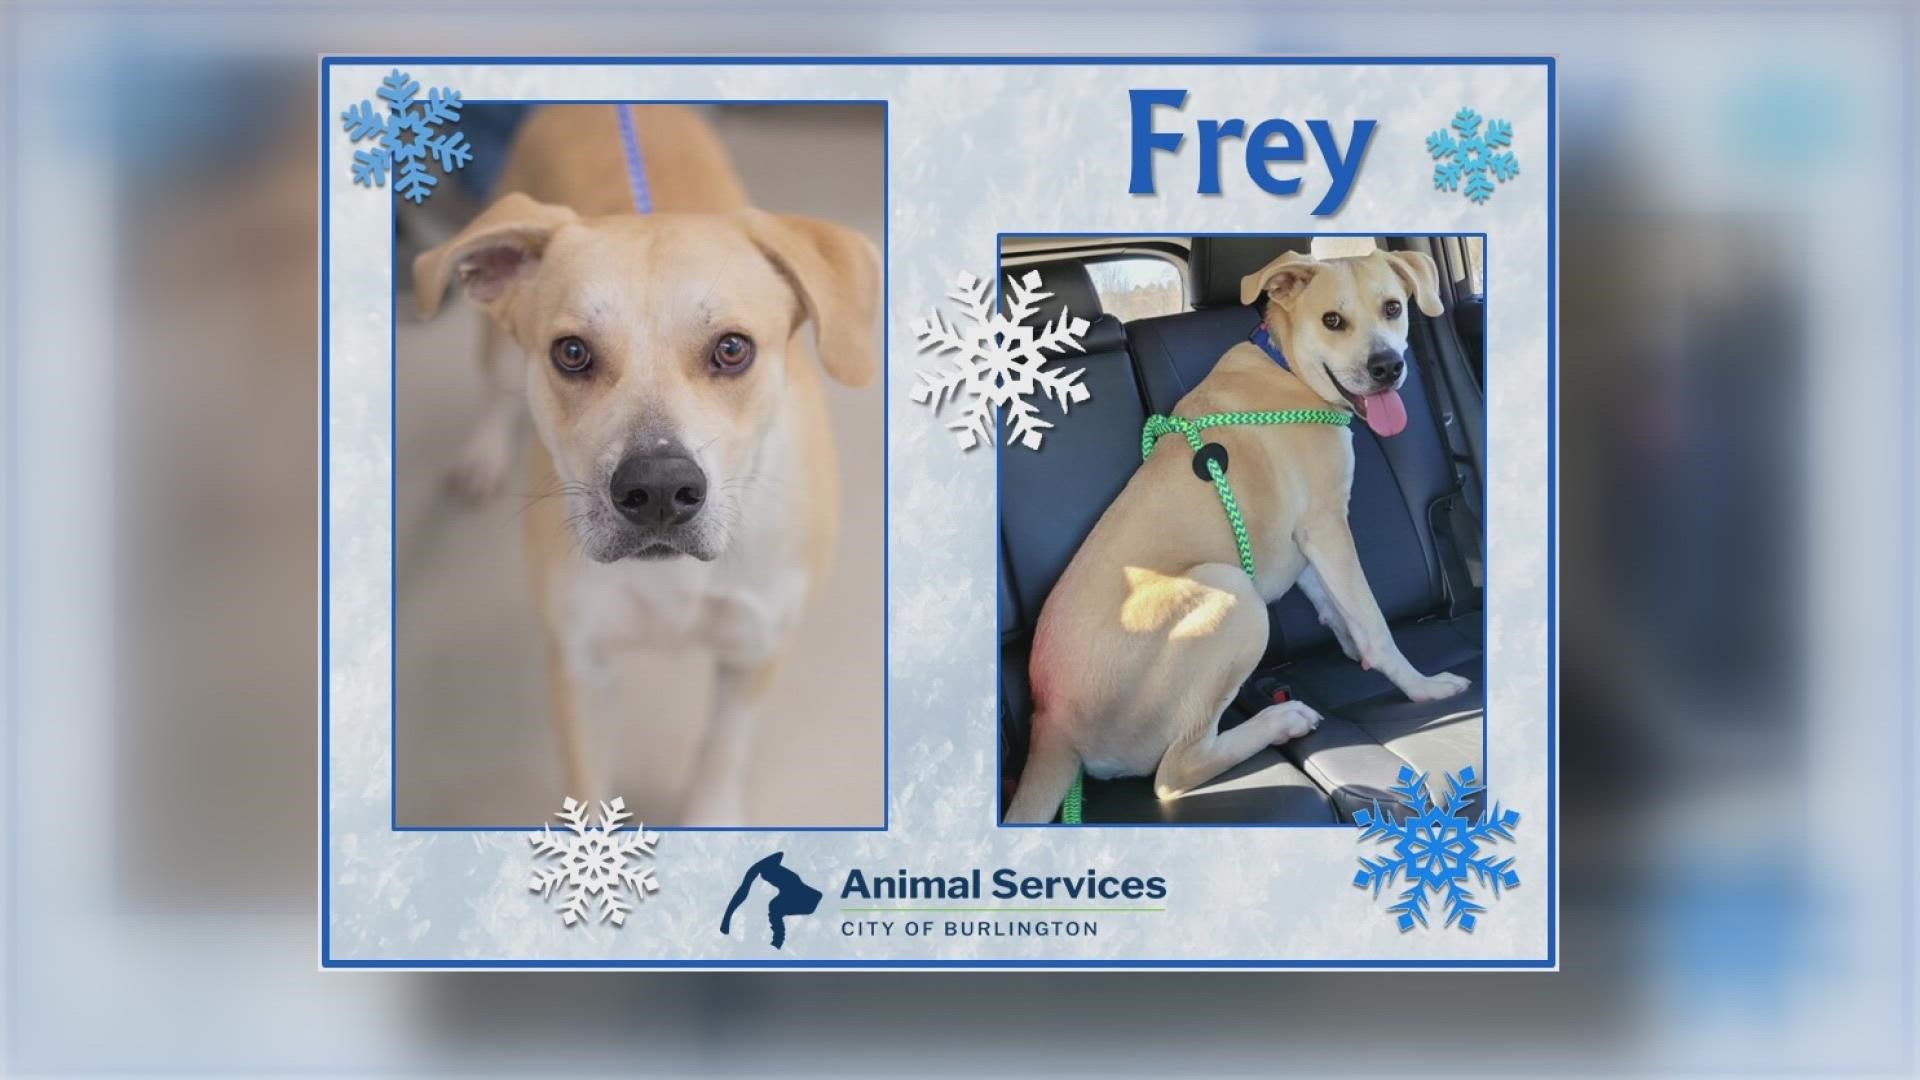 Let’s get Frey adopted!